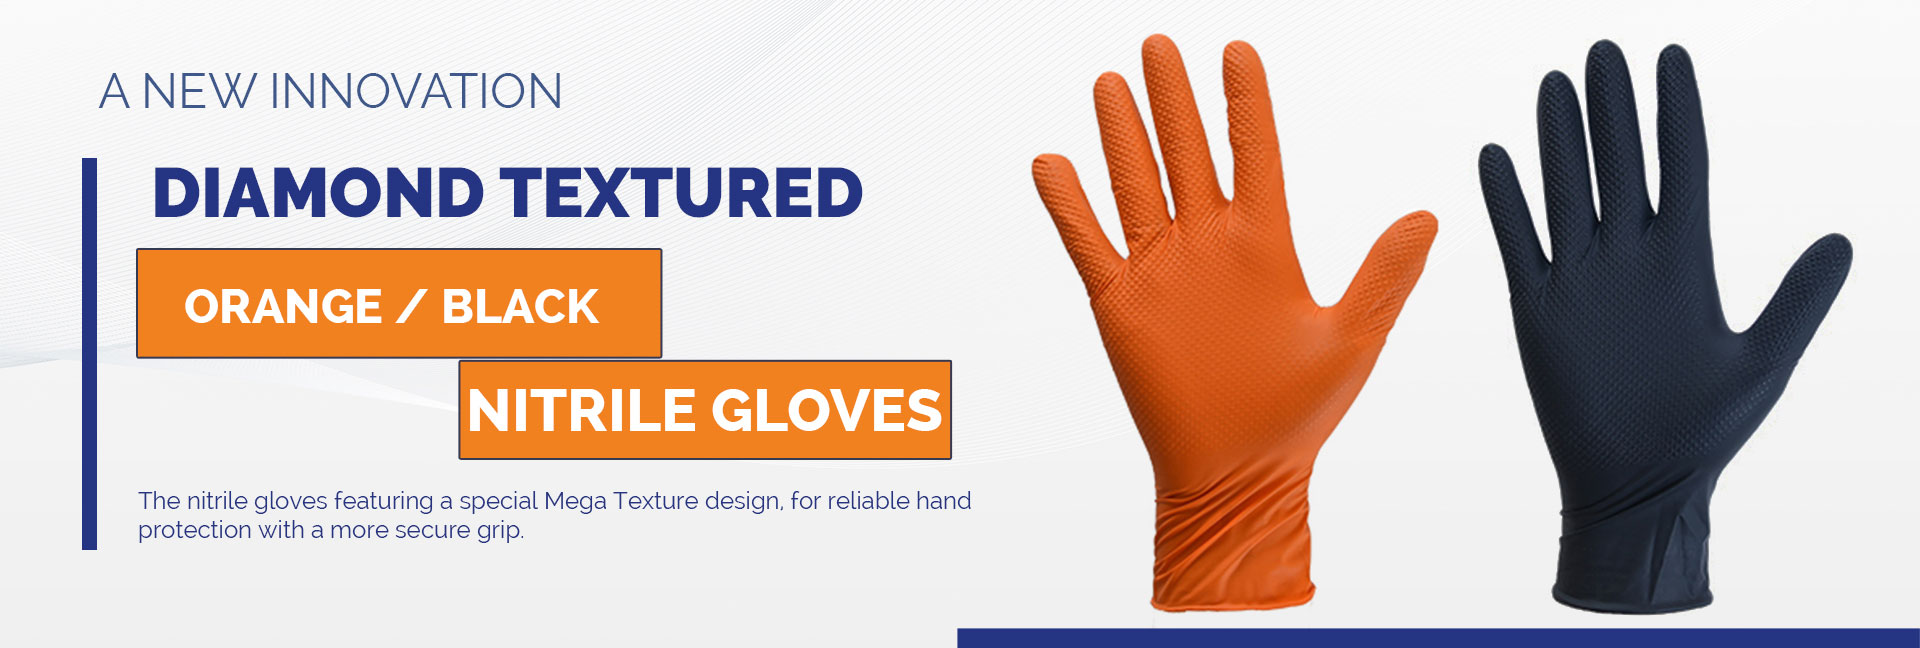 diamond-textured-nitrile-gloves-banners